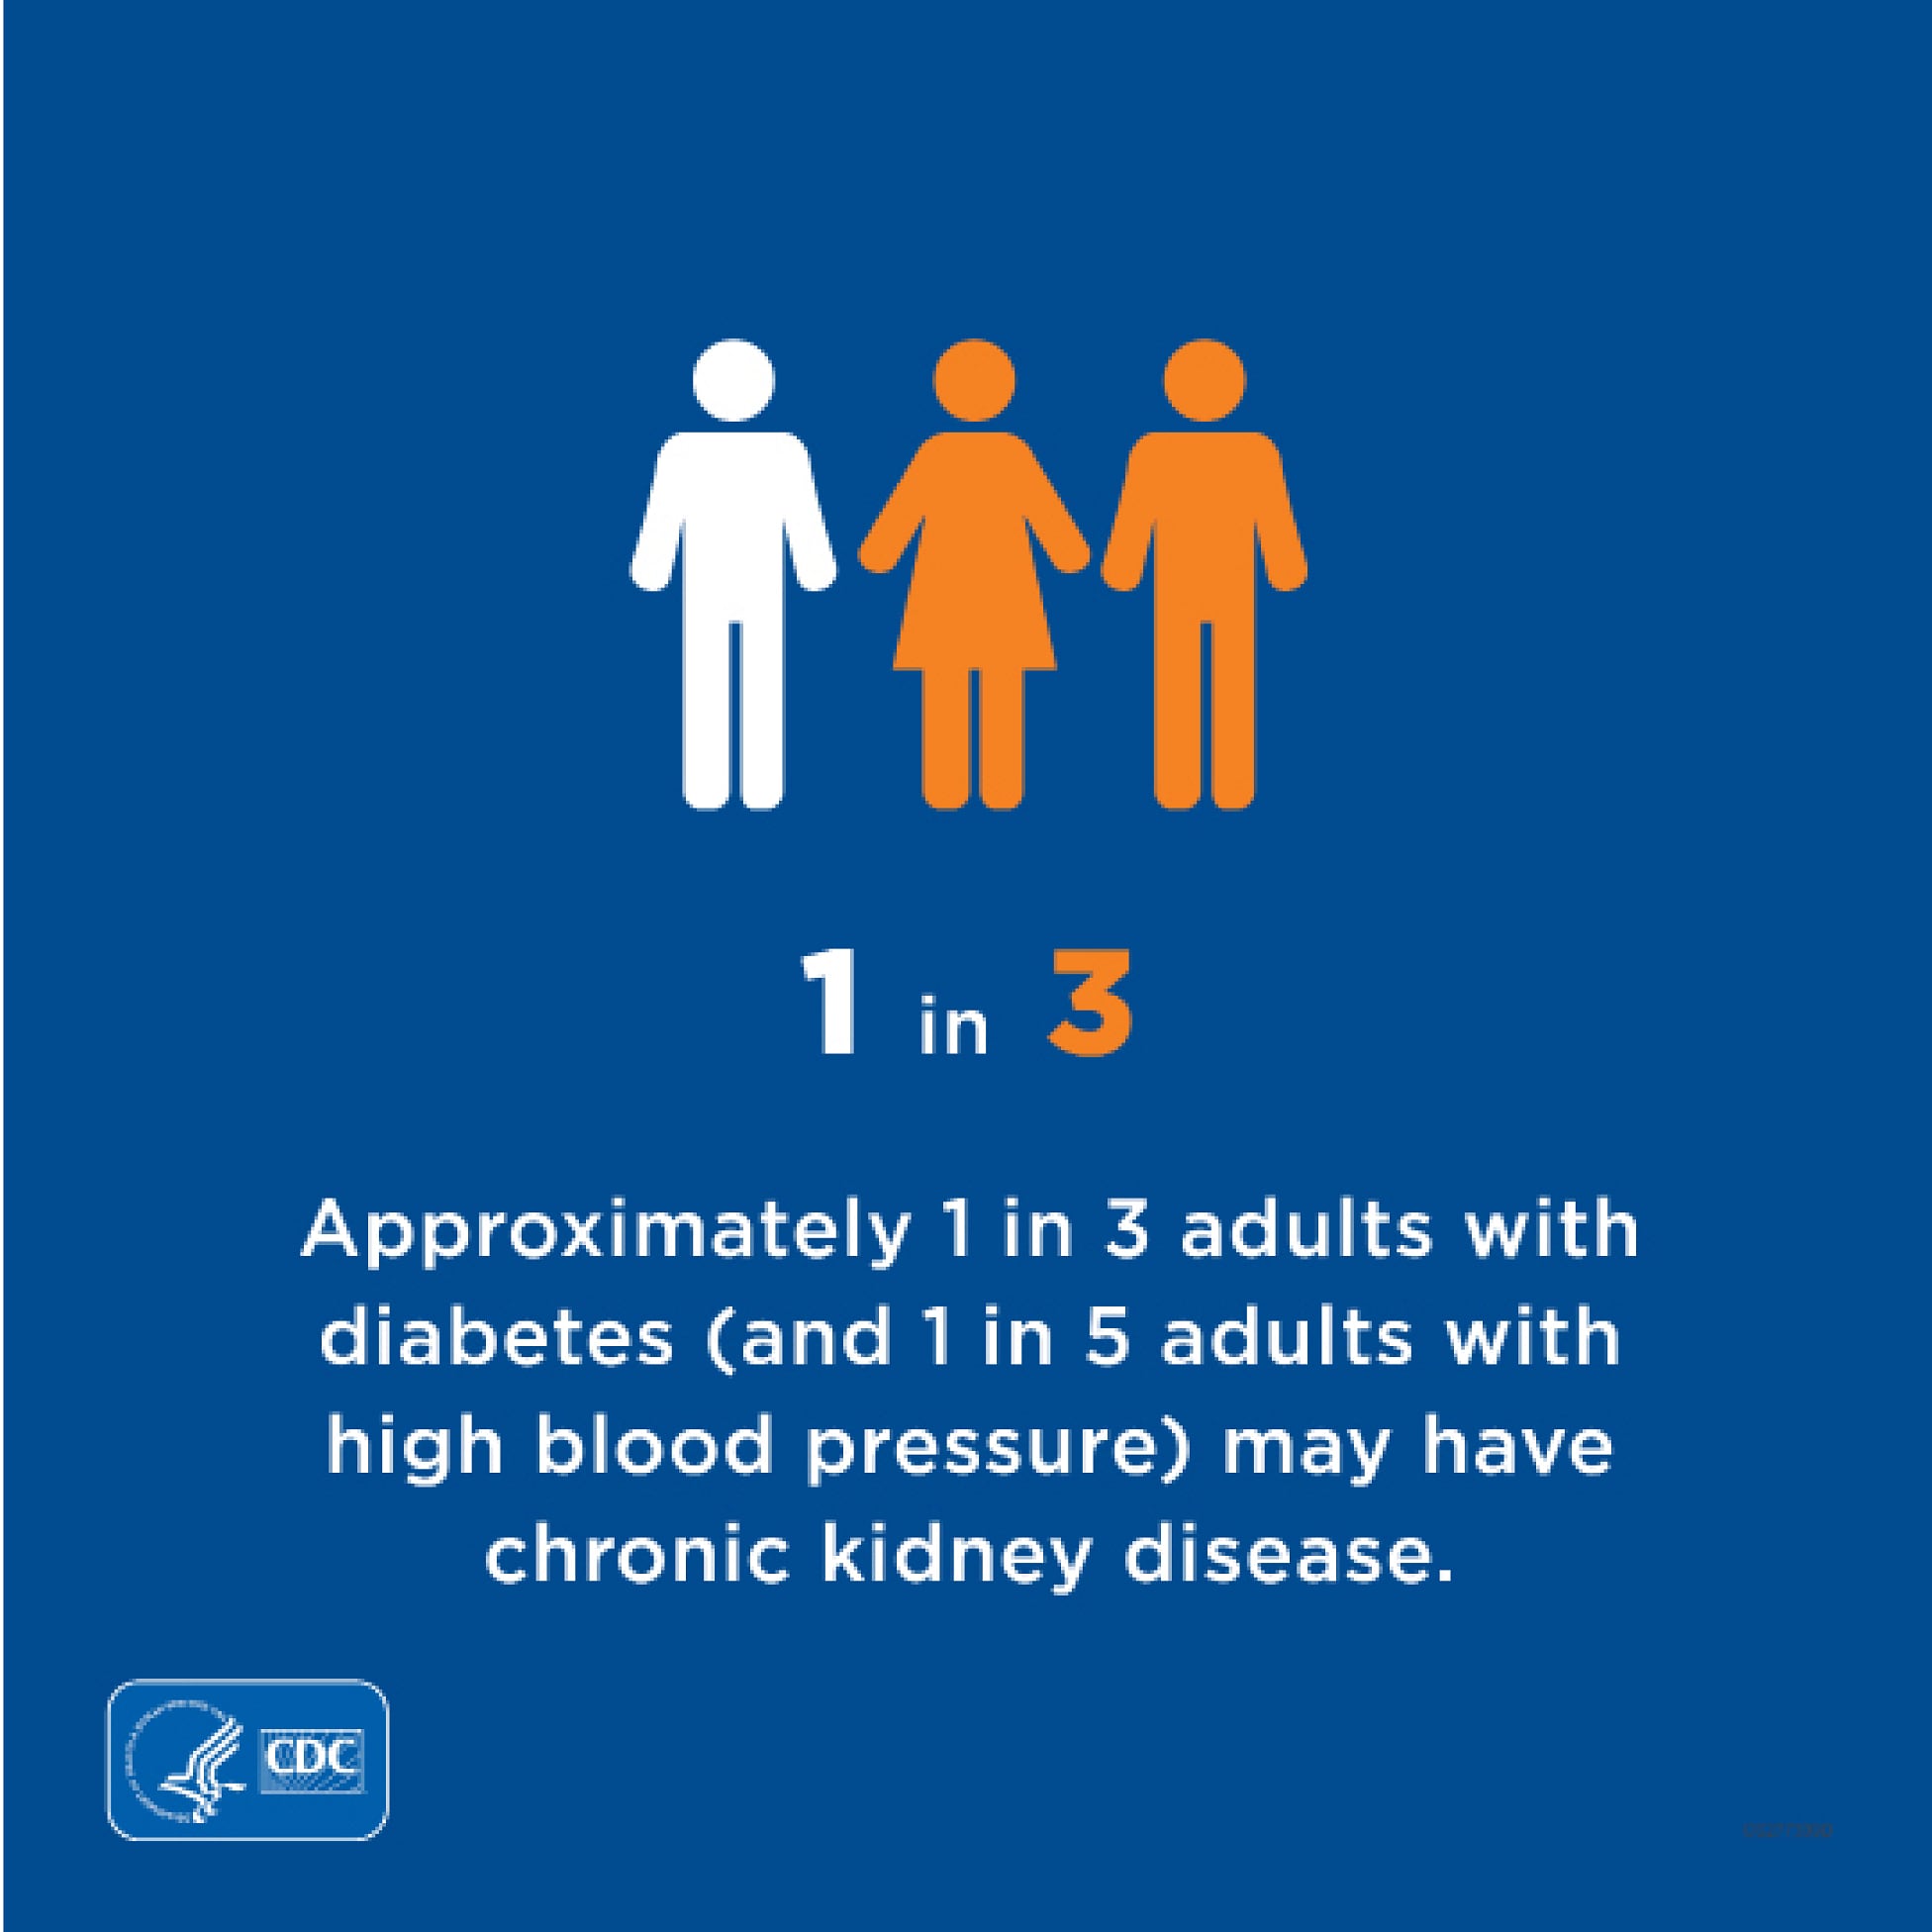 Approximately 1 in 3 adults with diabetes (and 1 in 5 adults with high blood pressure) may have chronic kidney disease.